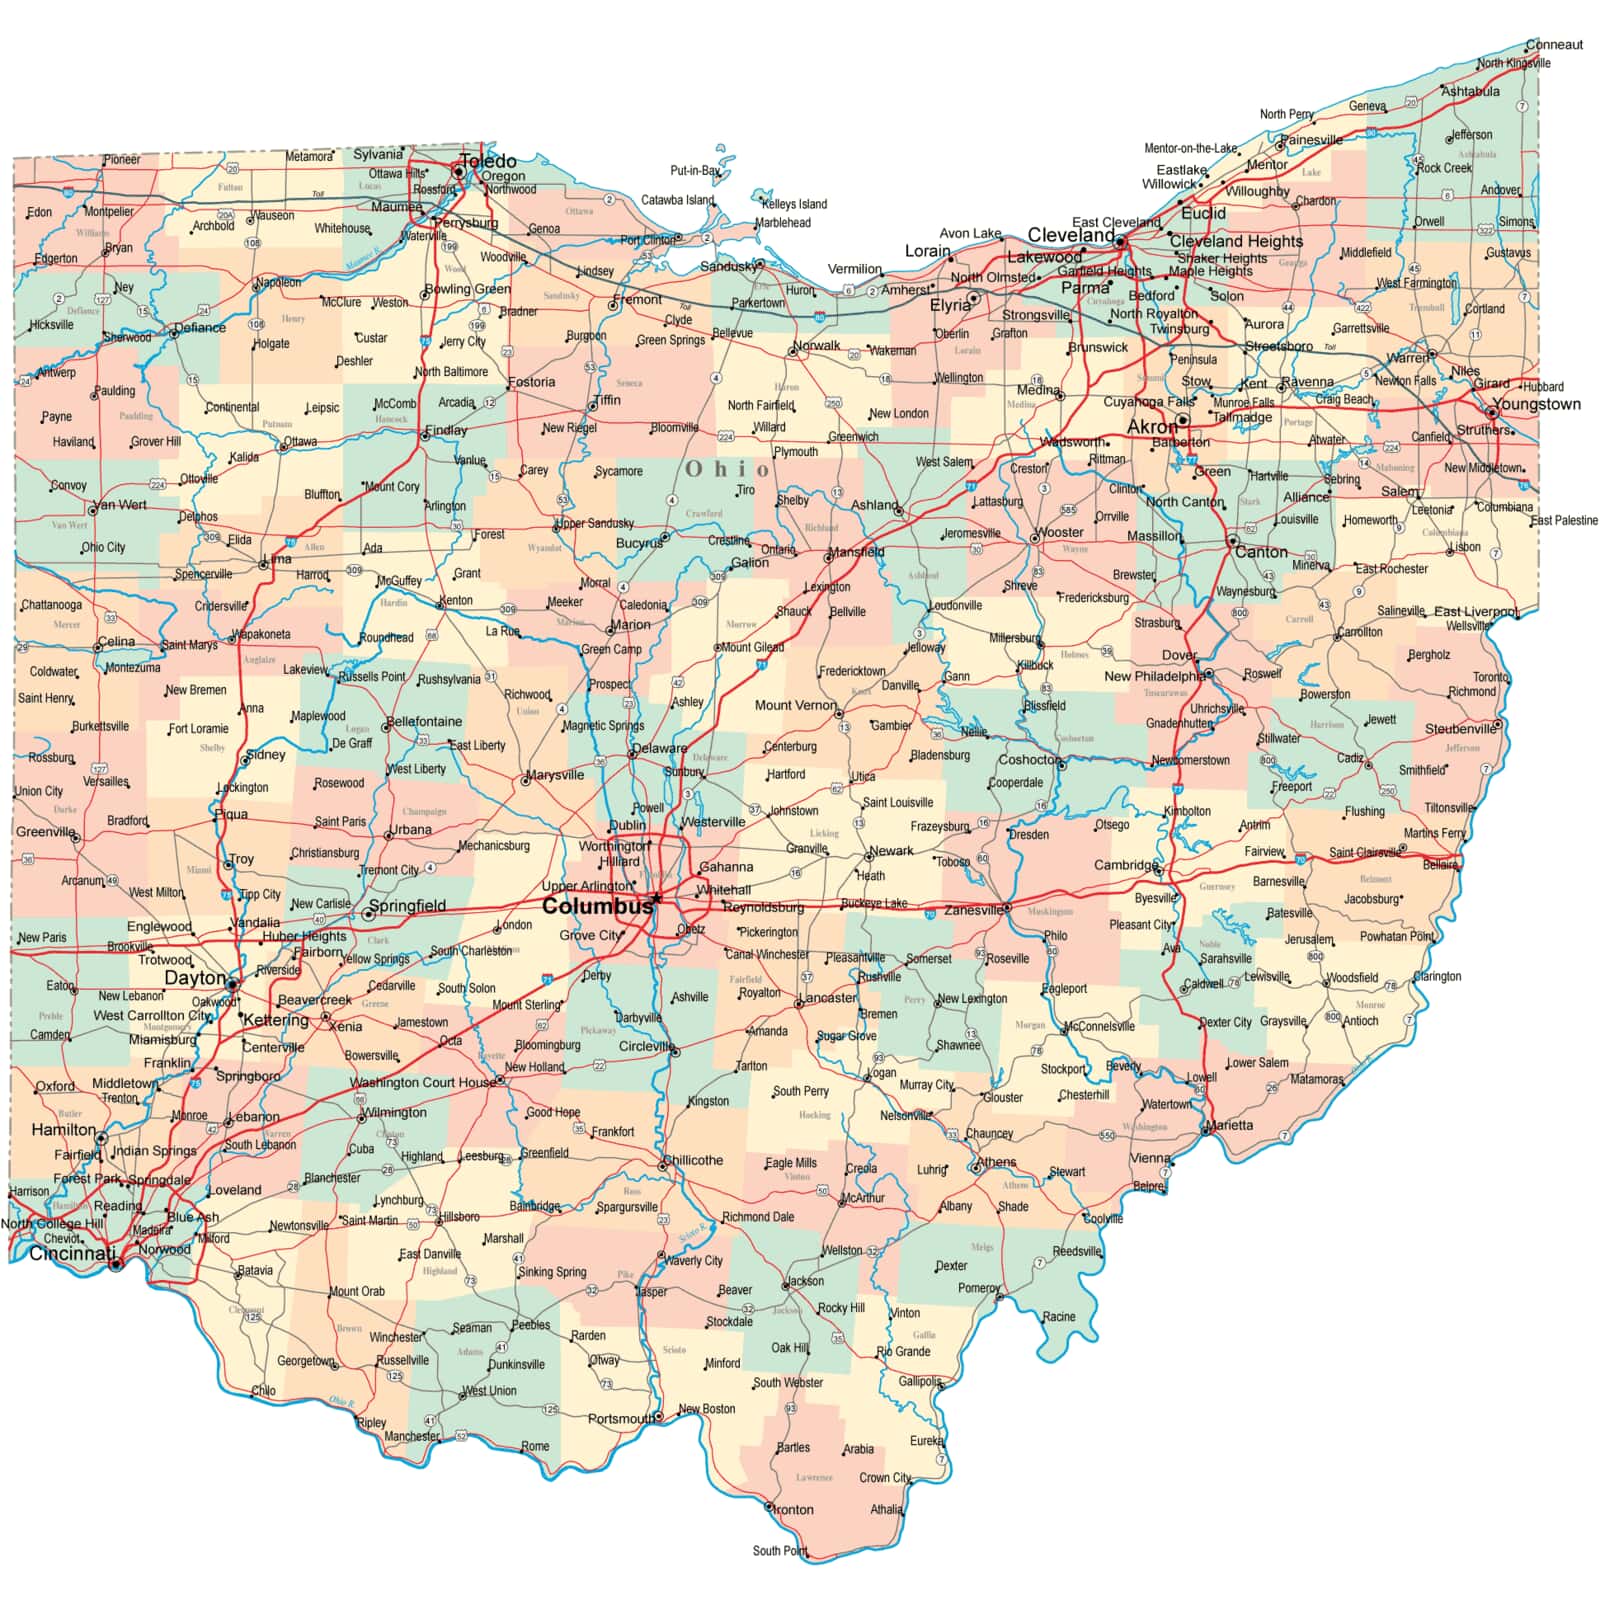 Ohio County Maps With Roads Ohio Road Map   OH Road Map   Ohio Roads and Highways